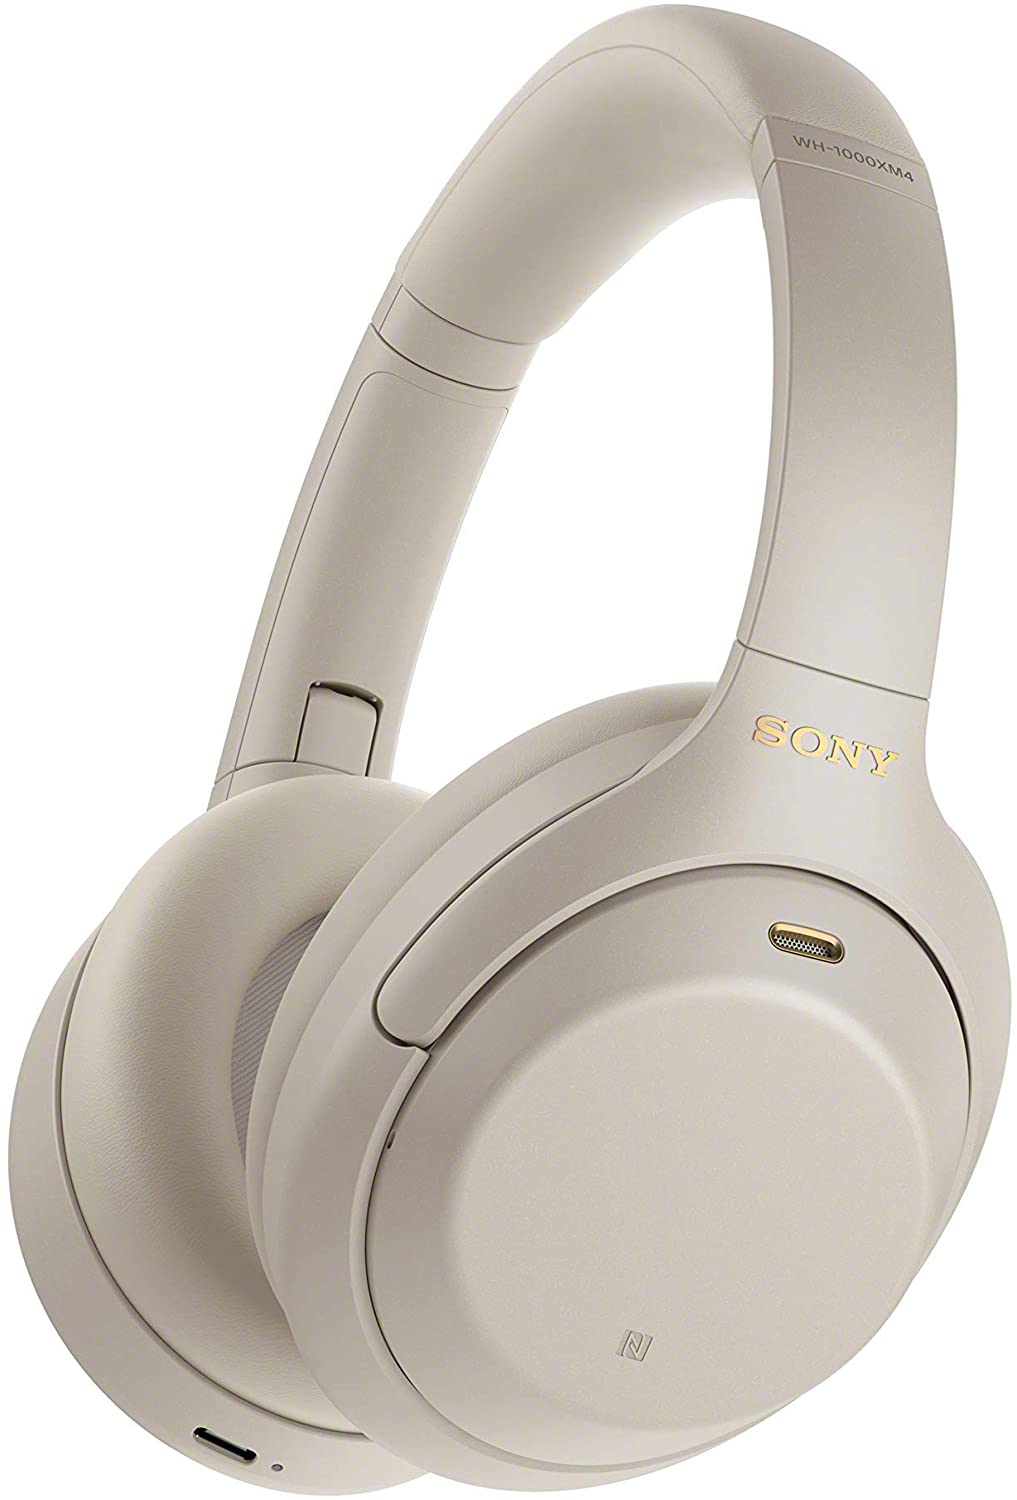 Sony WH-1000XM4 Wireless Noise-Cancelling Over-the-Ear Headphones - Silver (Refurbished)